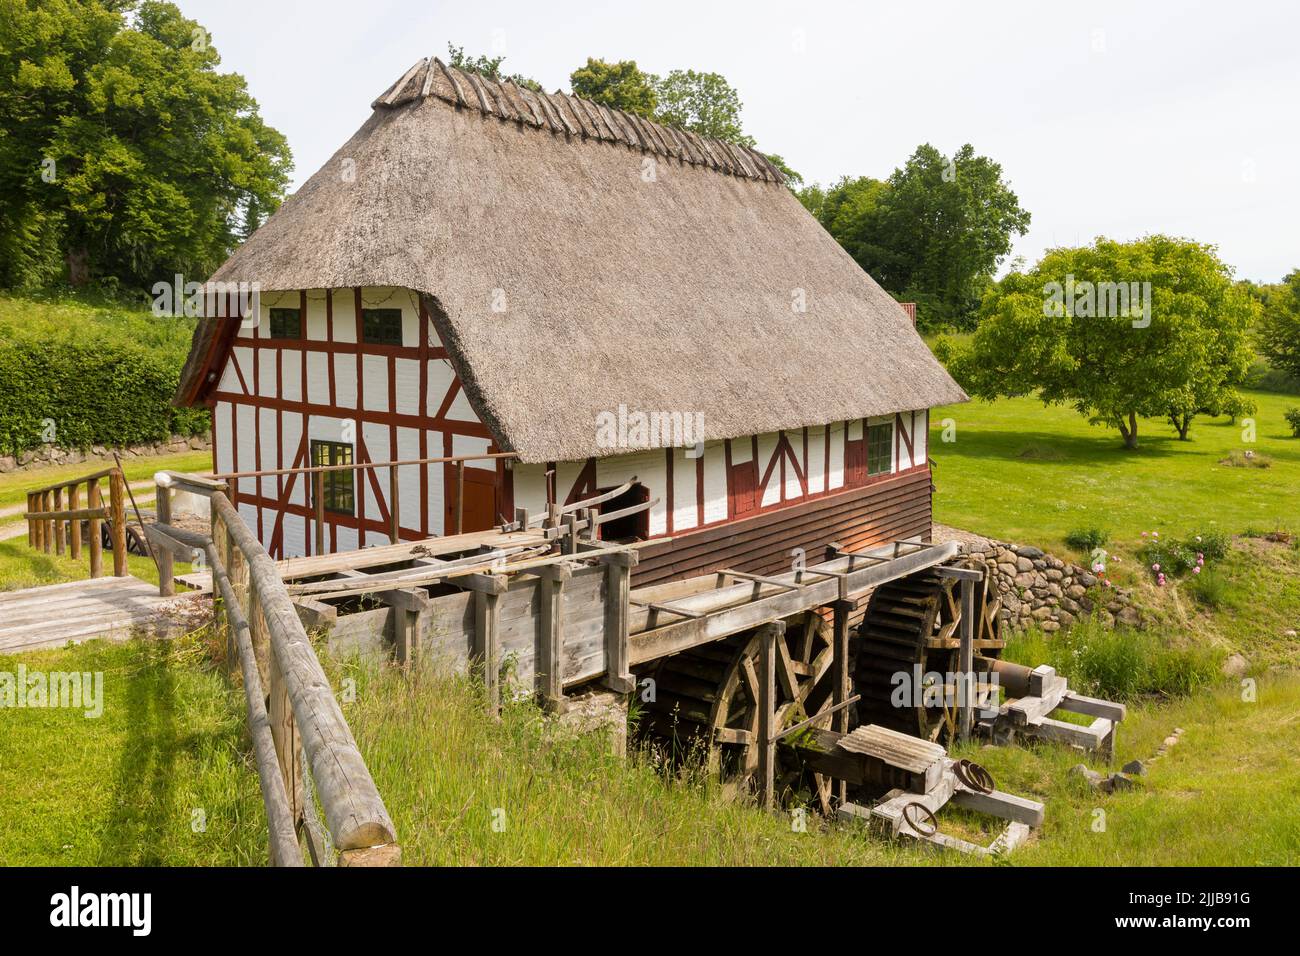 Historic half-timbered watermill with thatched roof at Vejstrup, Funen, Denmark Stock Photo